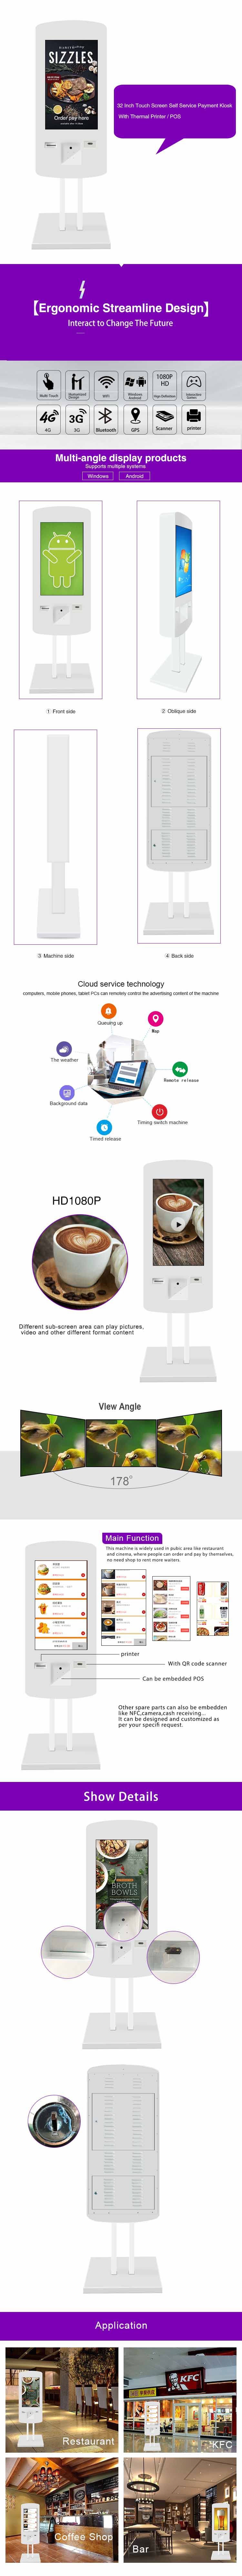 Model Number: MWE643 OS System Floor Stand LCD Digital Signage In Restaurant